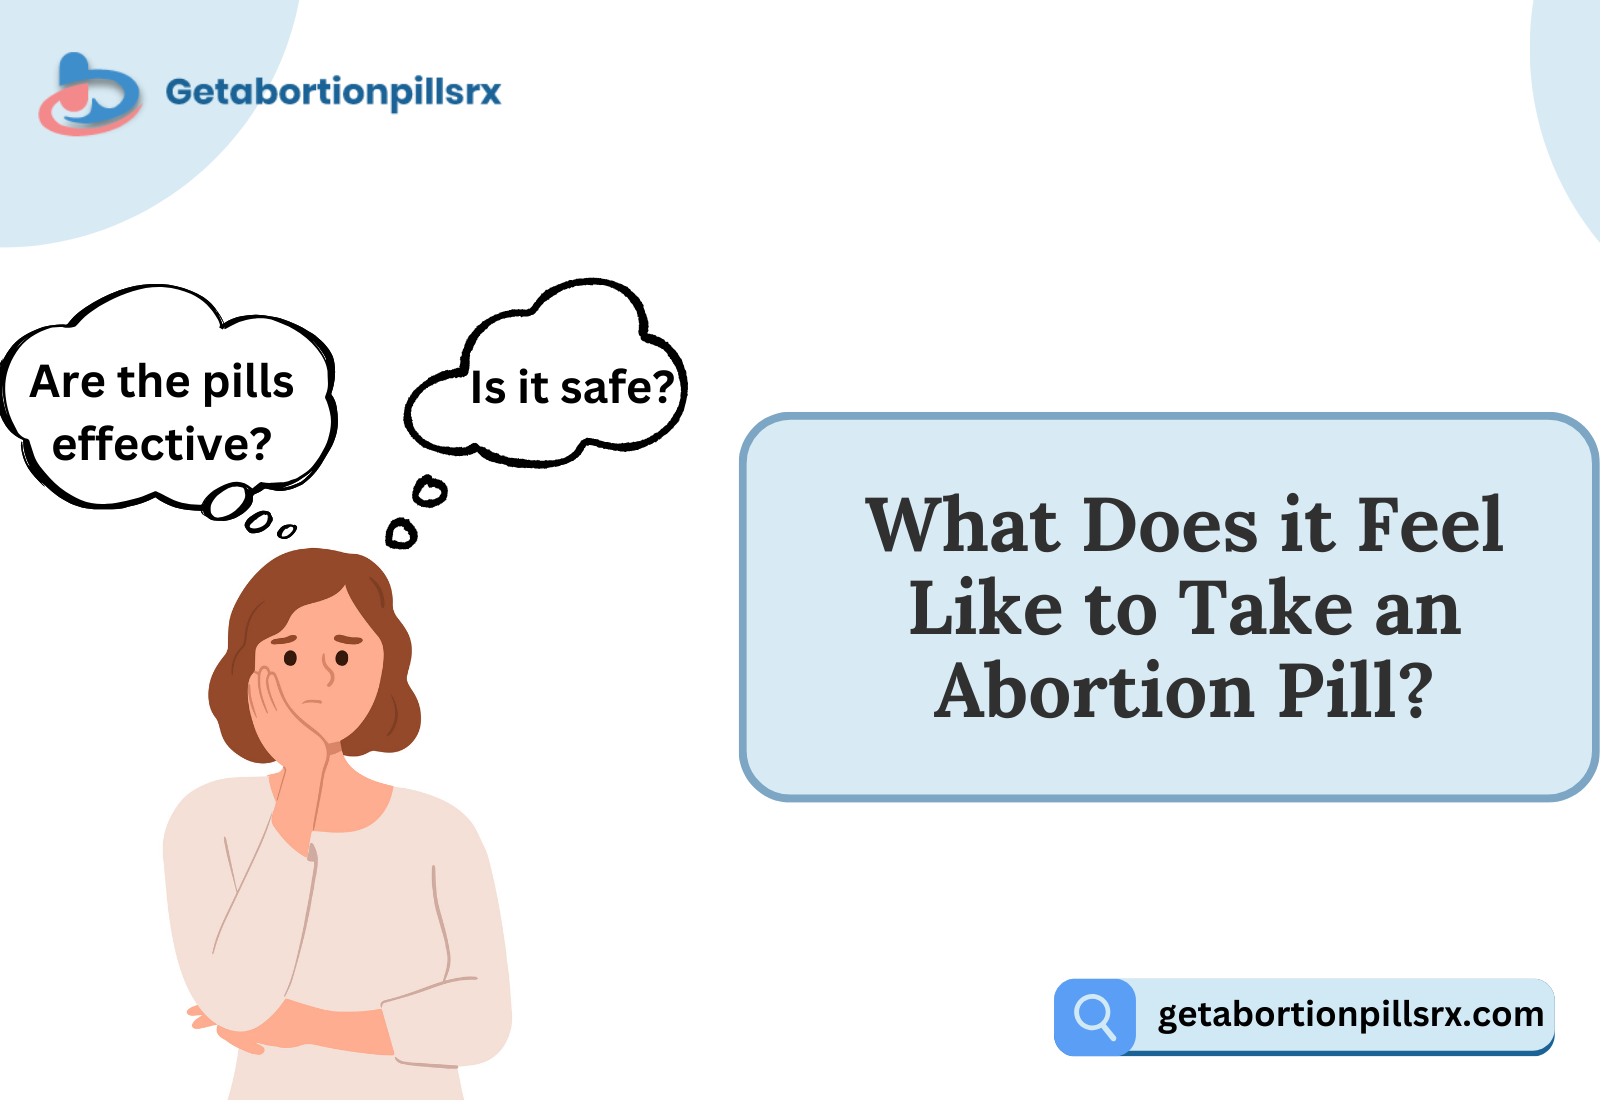 What Does it Feel Like to Take an Abortion Pill?